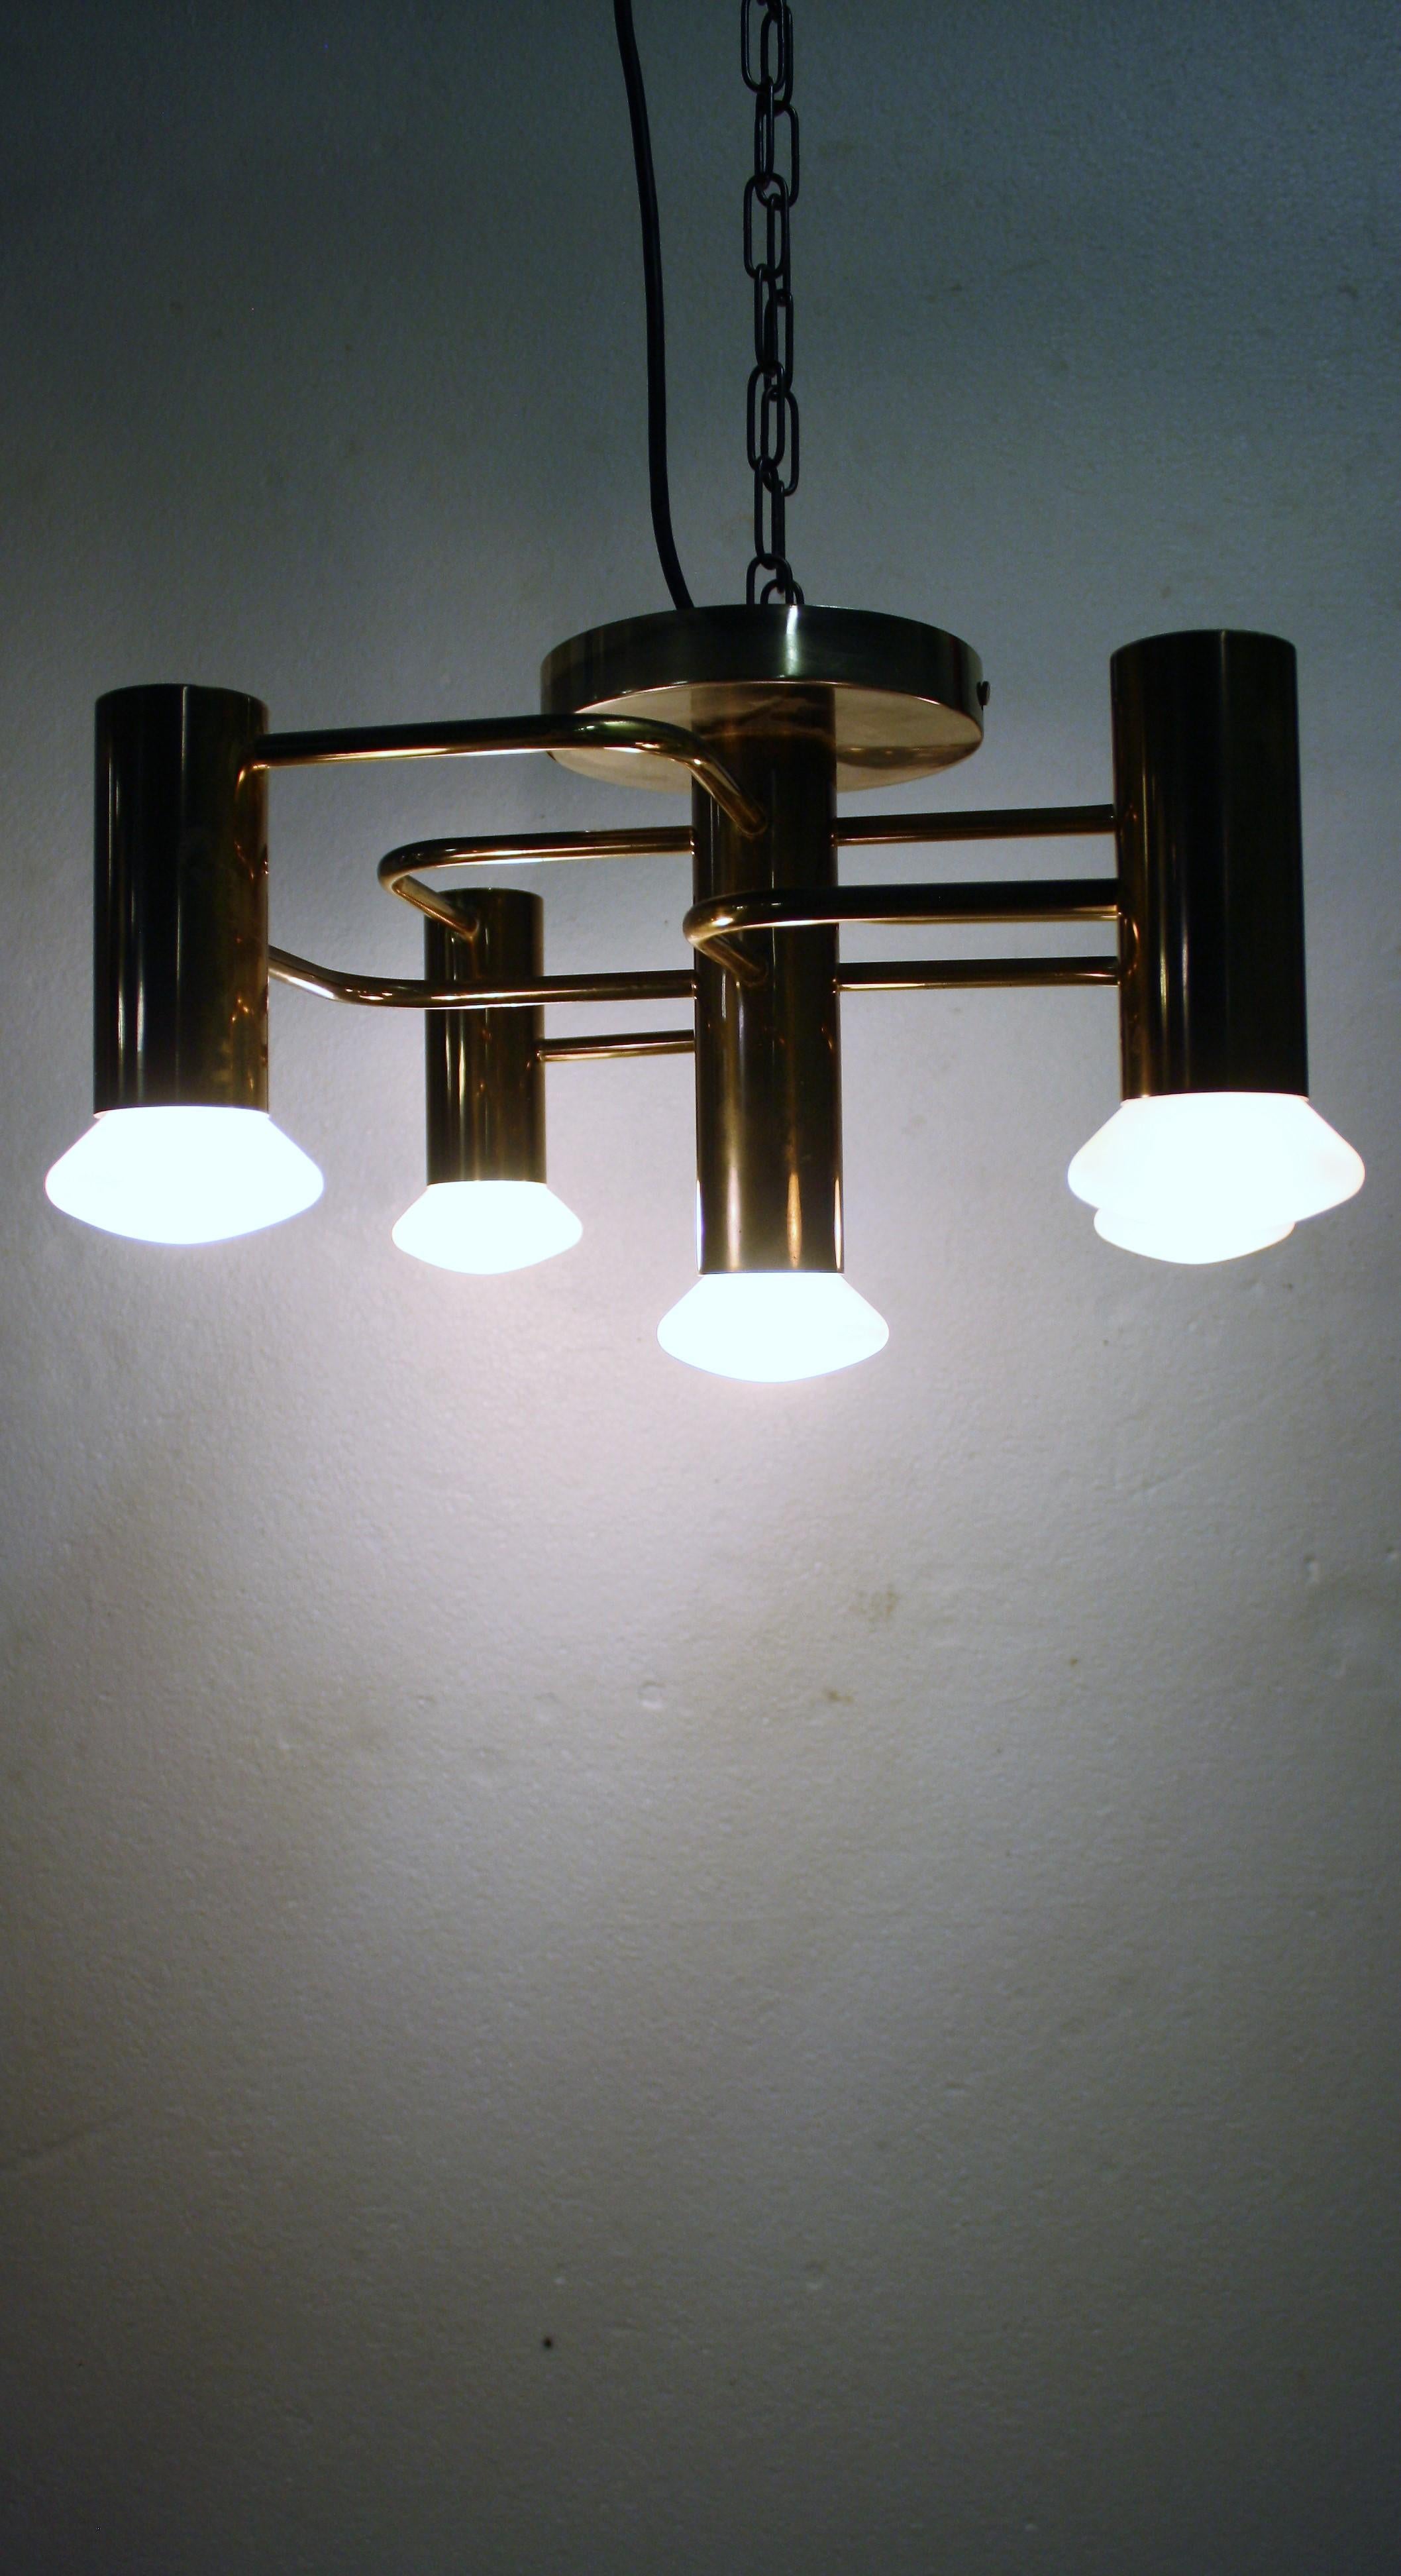 Vintage brass chandelier with five-light points.

The chandelier was designed by Geatano Sciolari and manufactured by S.A. Boulanger in Belgium.

1960s, Belgium

Measures: Height 23 cm/9.05